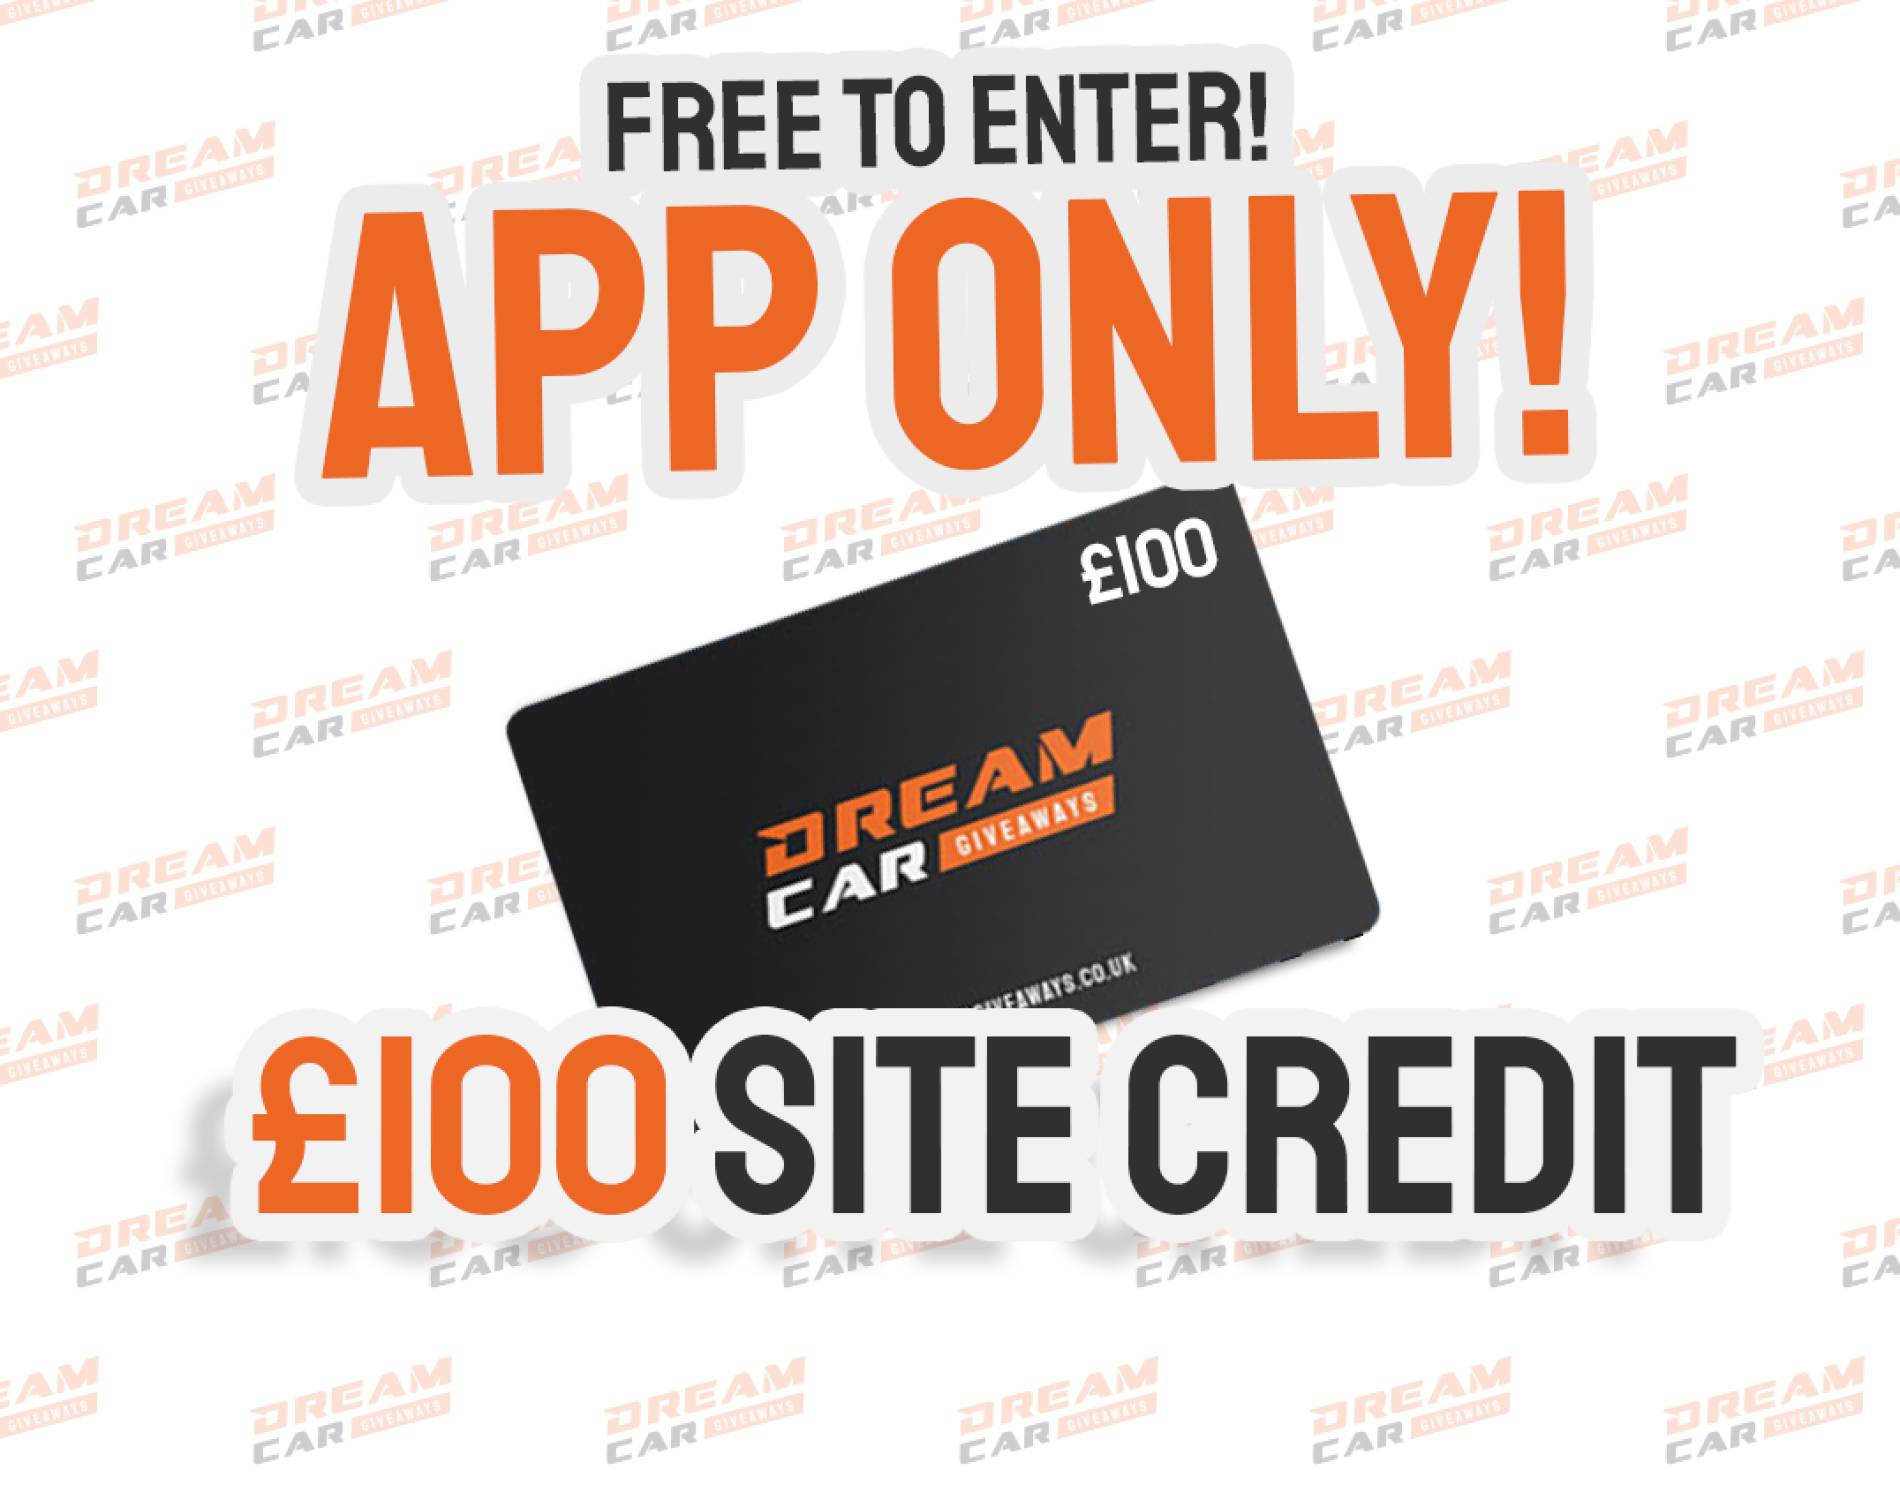 App Exclusive £100 Site Credit for FREE